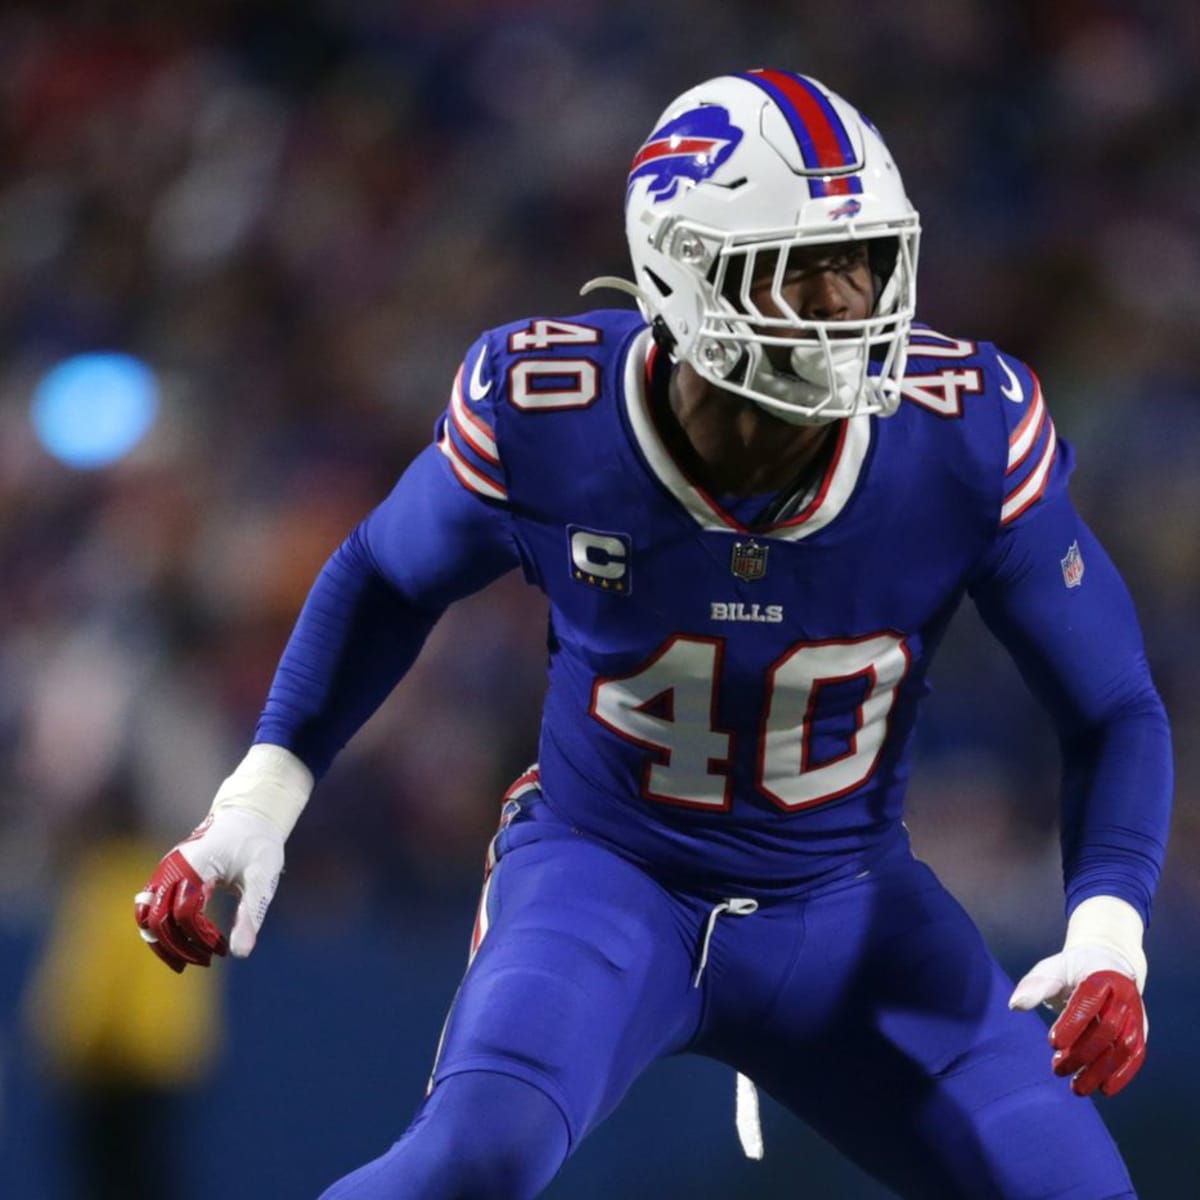 What are Bills' roster options with Von Miller